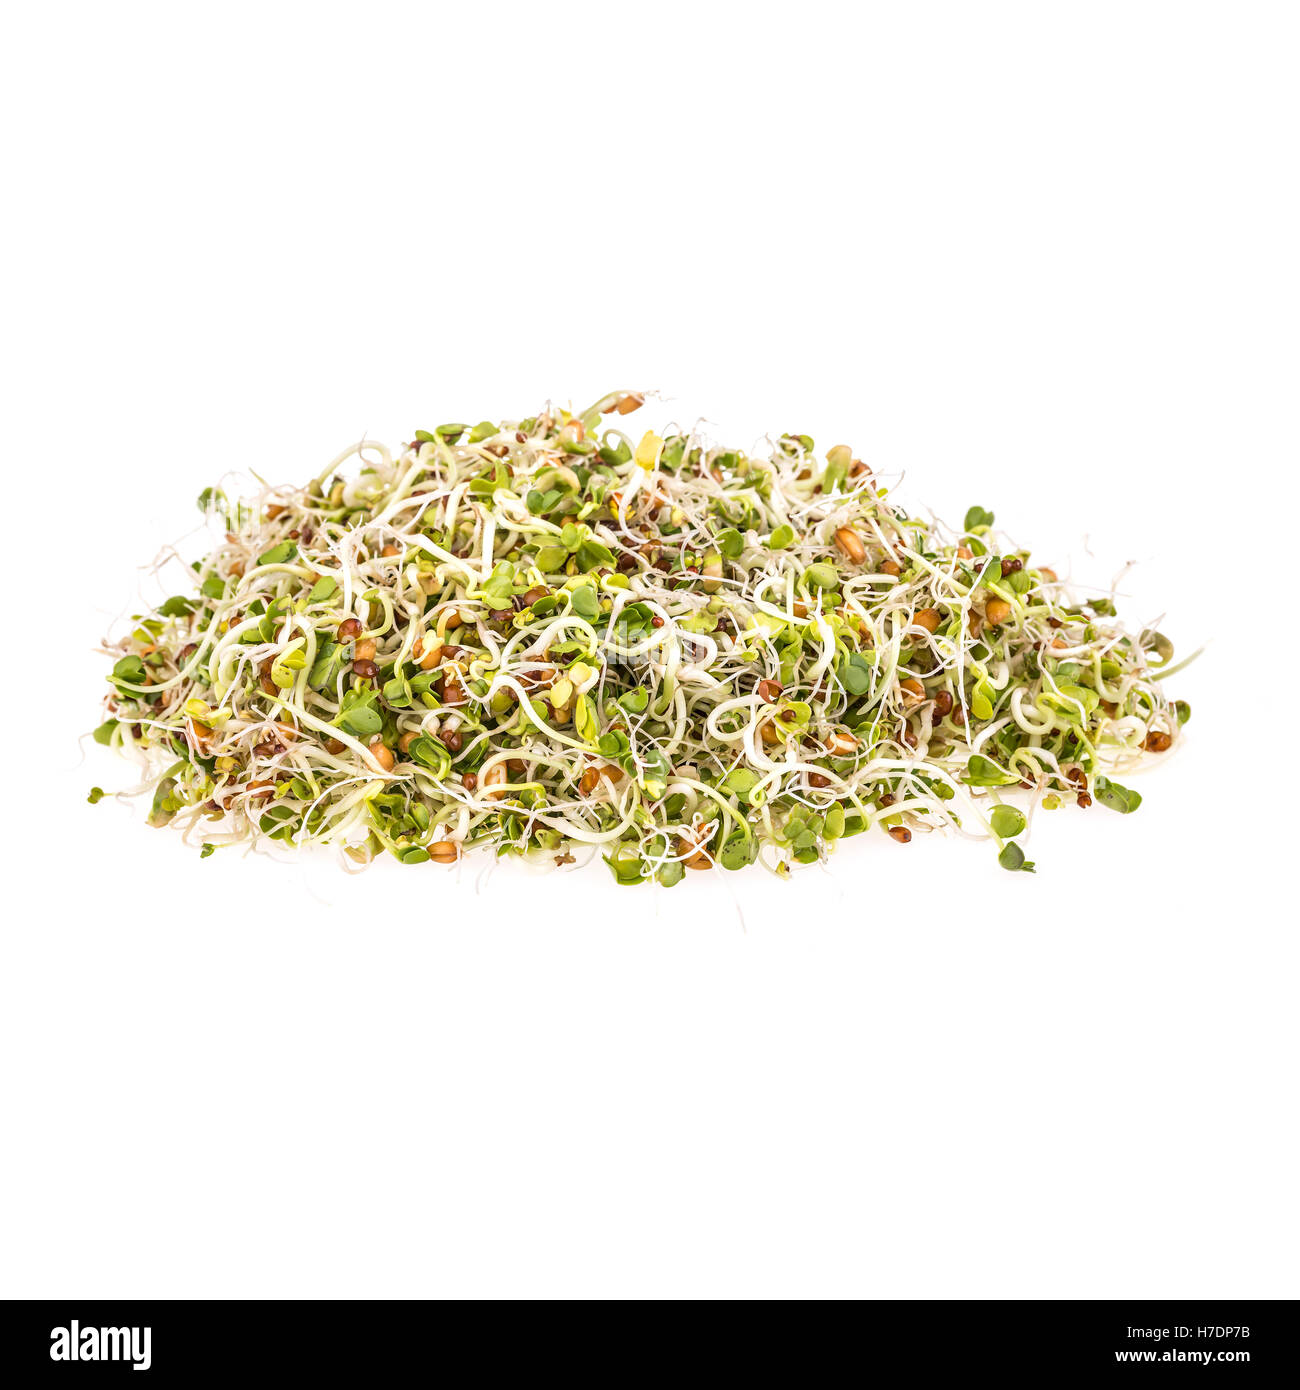 Sprouts Stock Photo